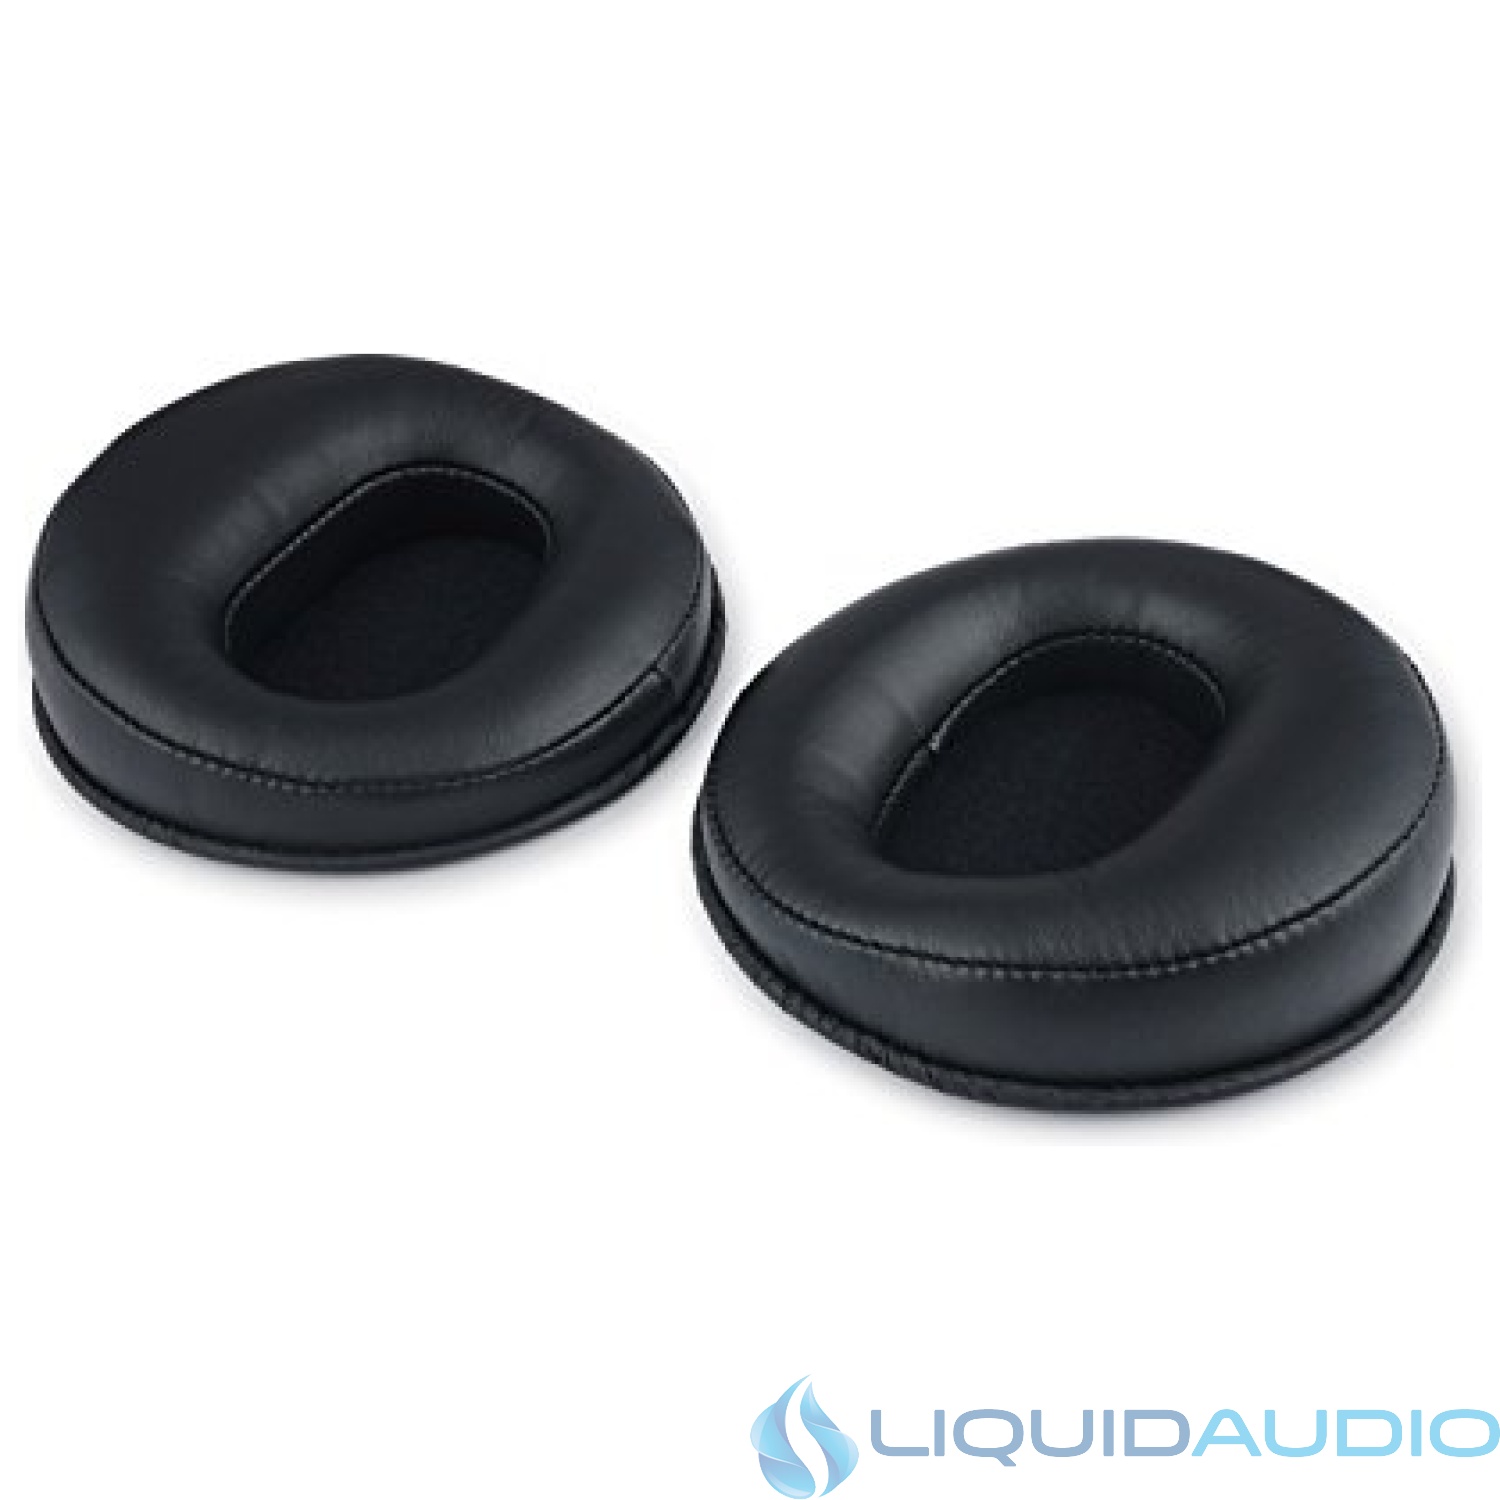 Fostex Replacement Ear Pads for TH-500RP and TH-X00 Headphones, Pair, Black (EX-EP-50)